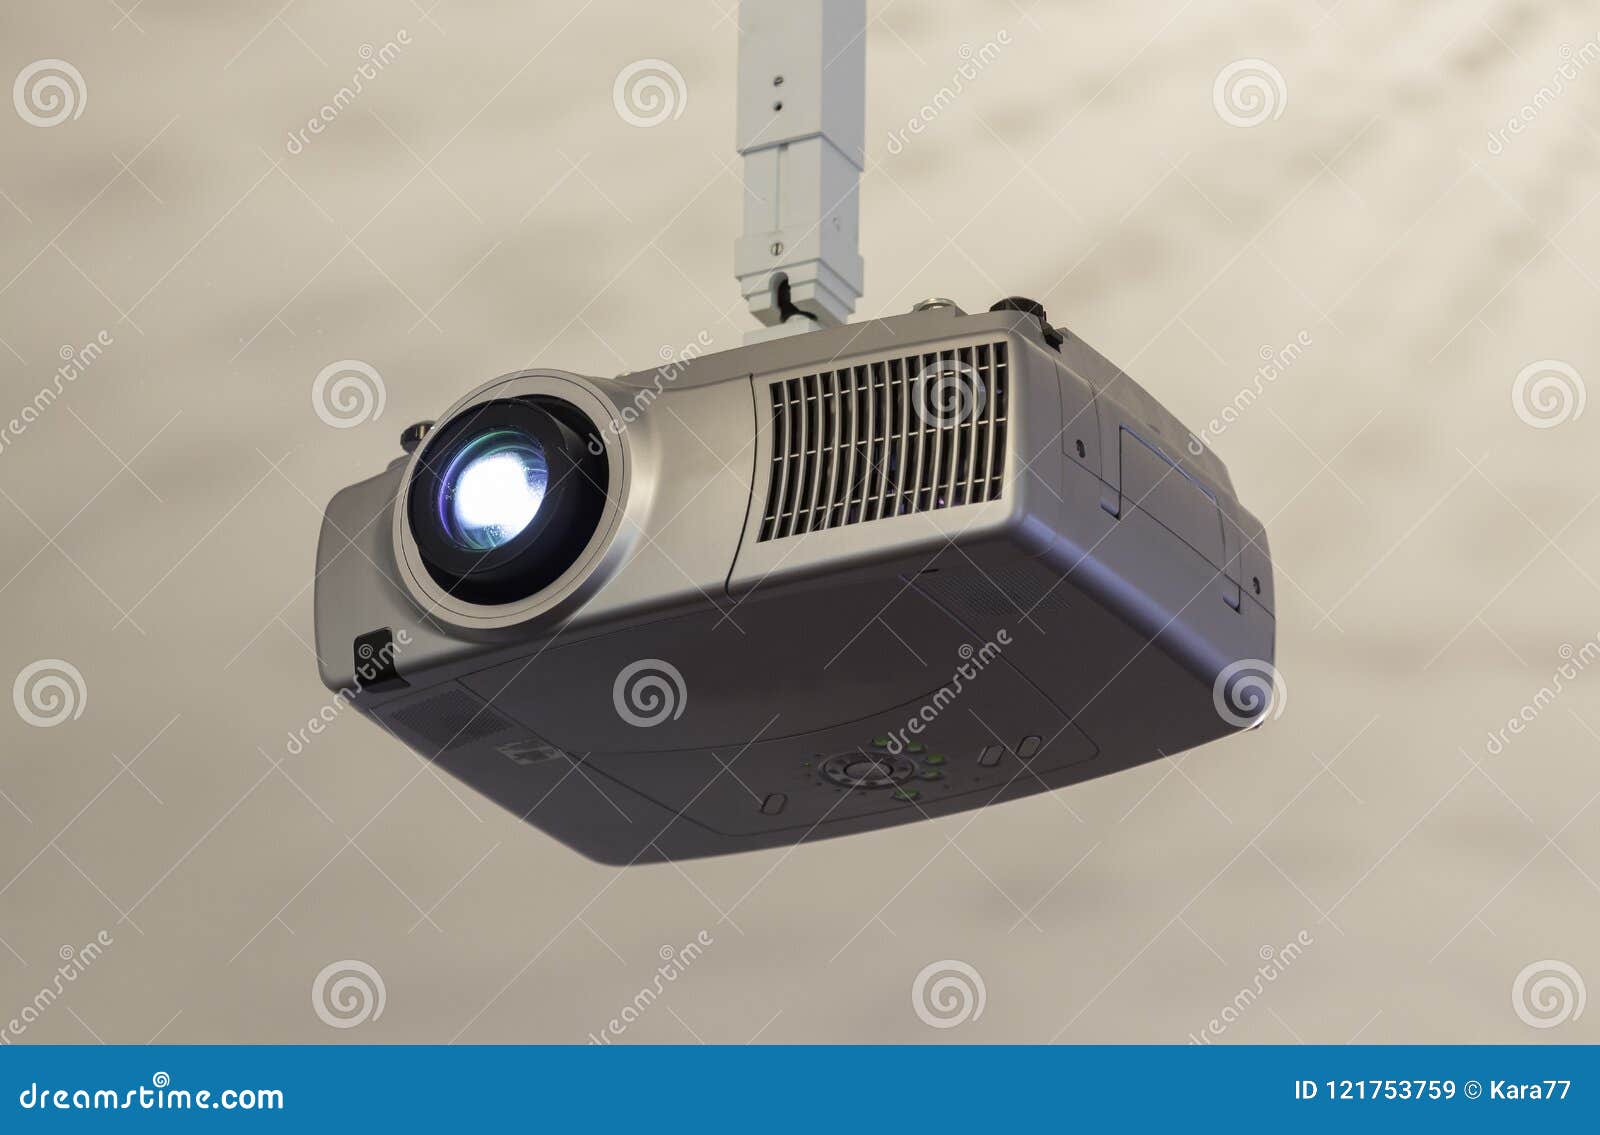 Ceiling Projector Stock Image Image Of Video Speech 121753759